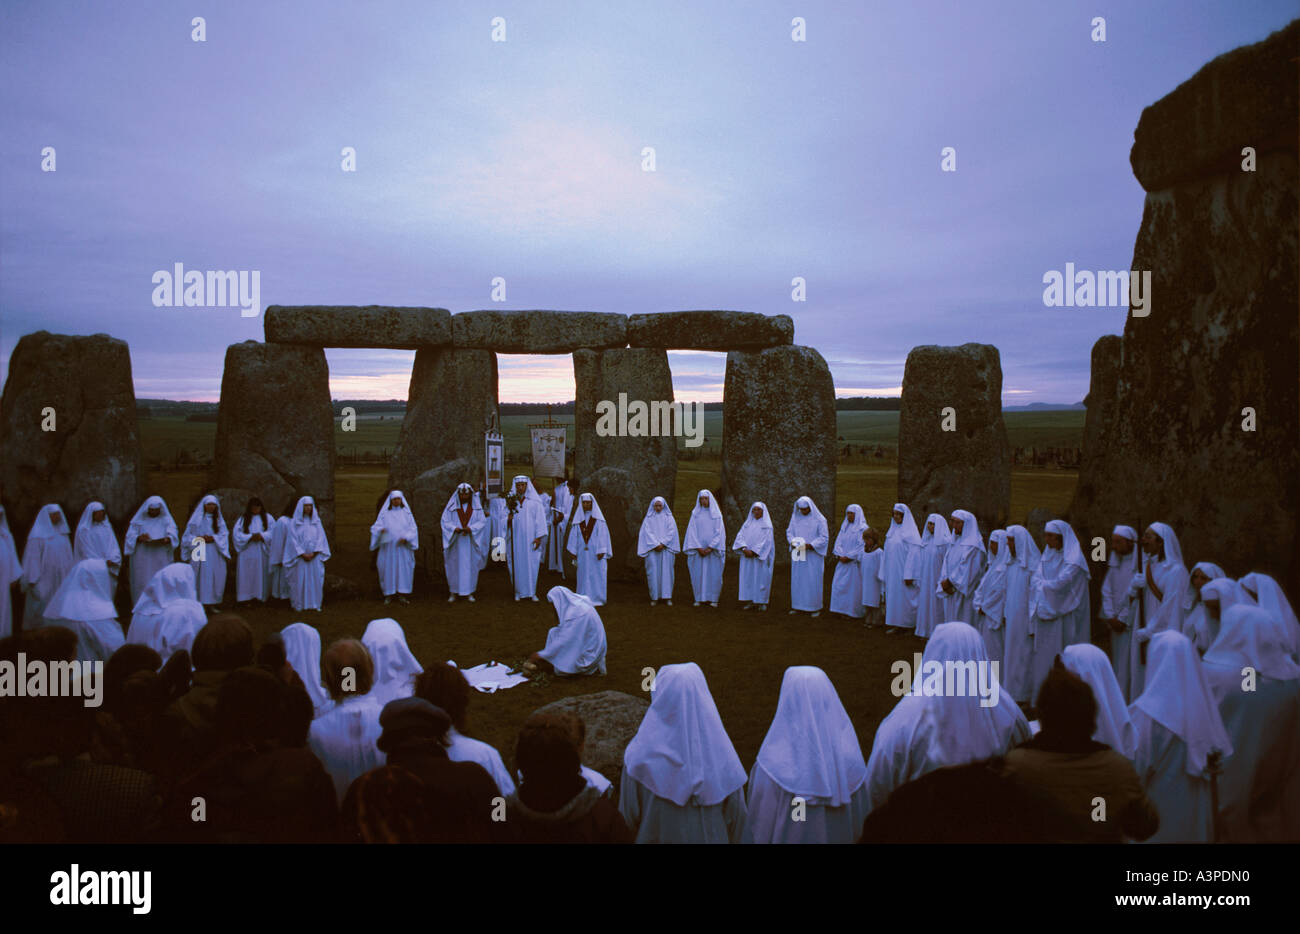 Druids celebrate the summer solstice at sunrise on June 21 within the ancient circle of Stonehenge Wiltshire England Stock Photo